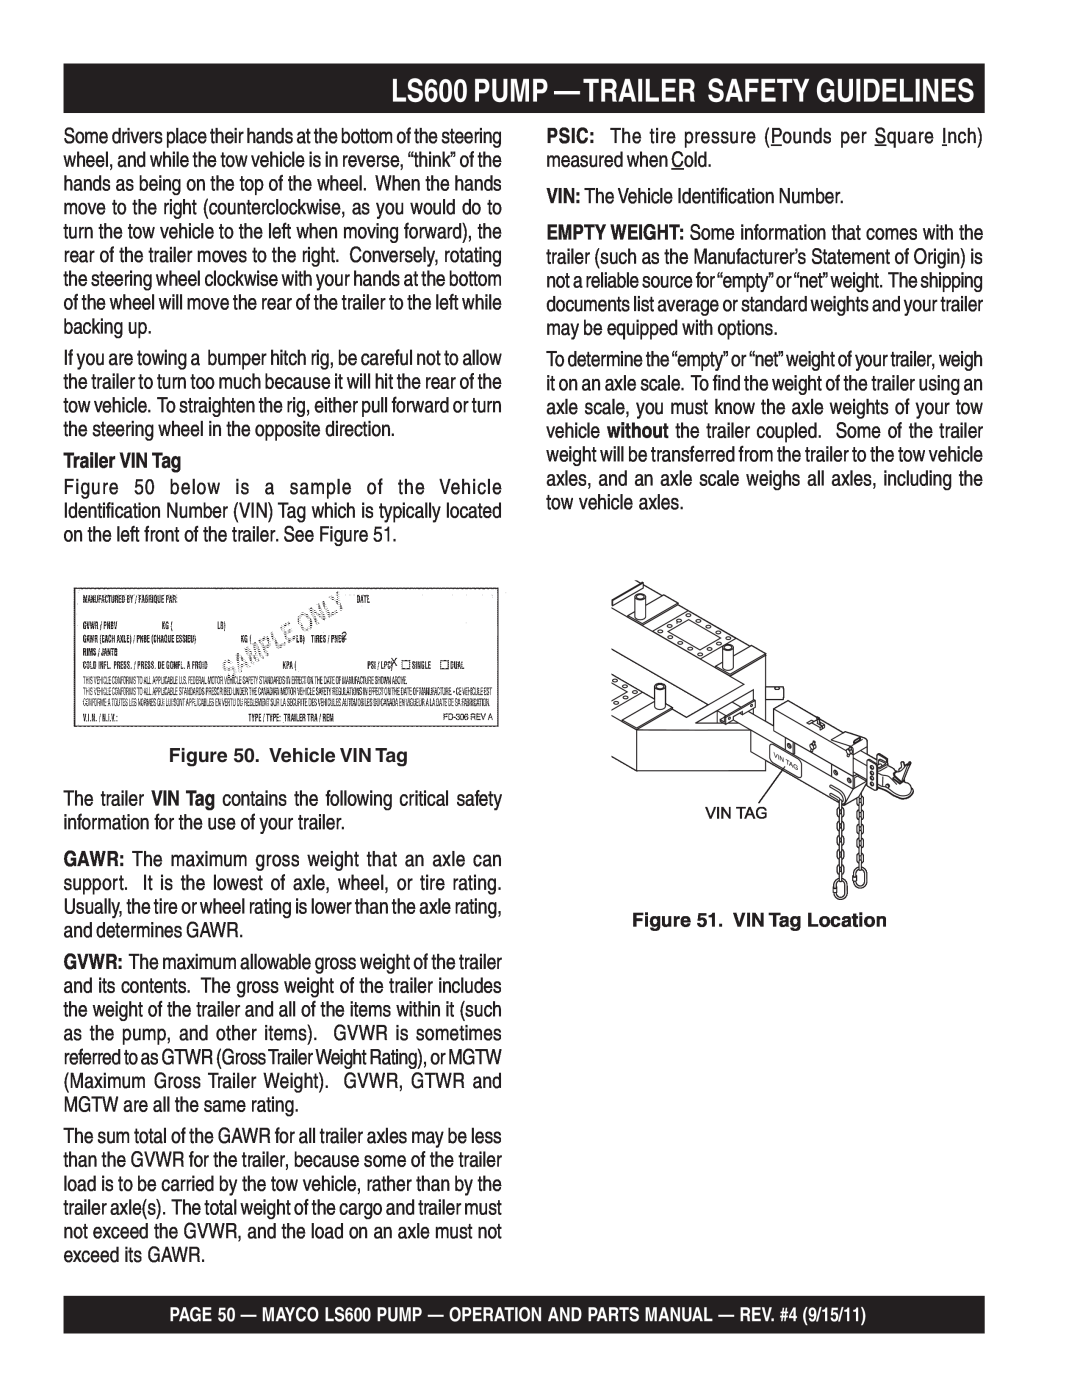 Multiquip manual LS600 PUMP —TRAILERSAFETY GUIDELINES, Trailer VIN Tag 